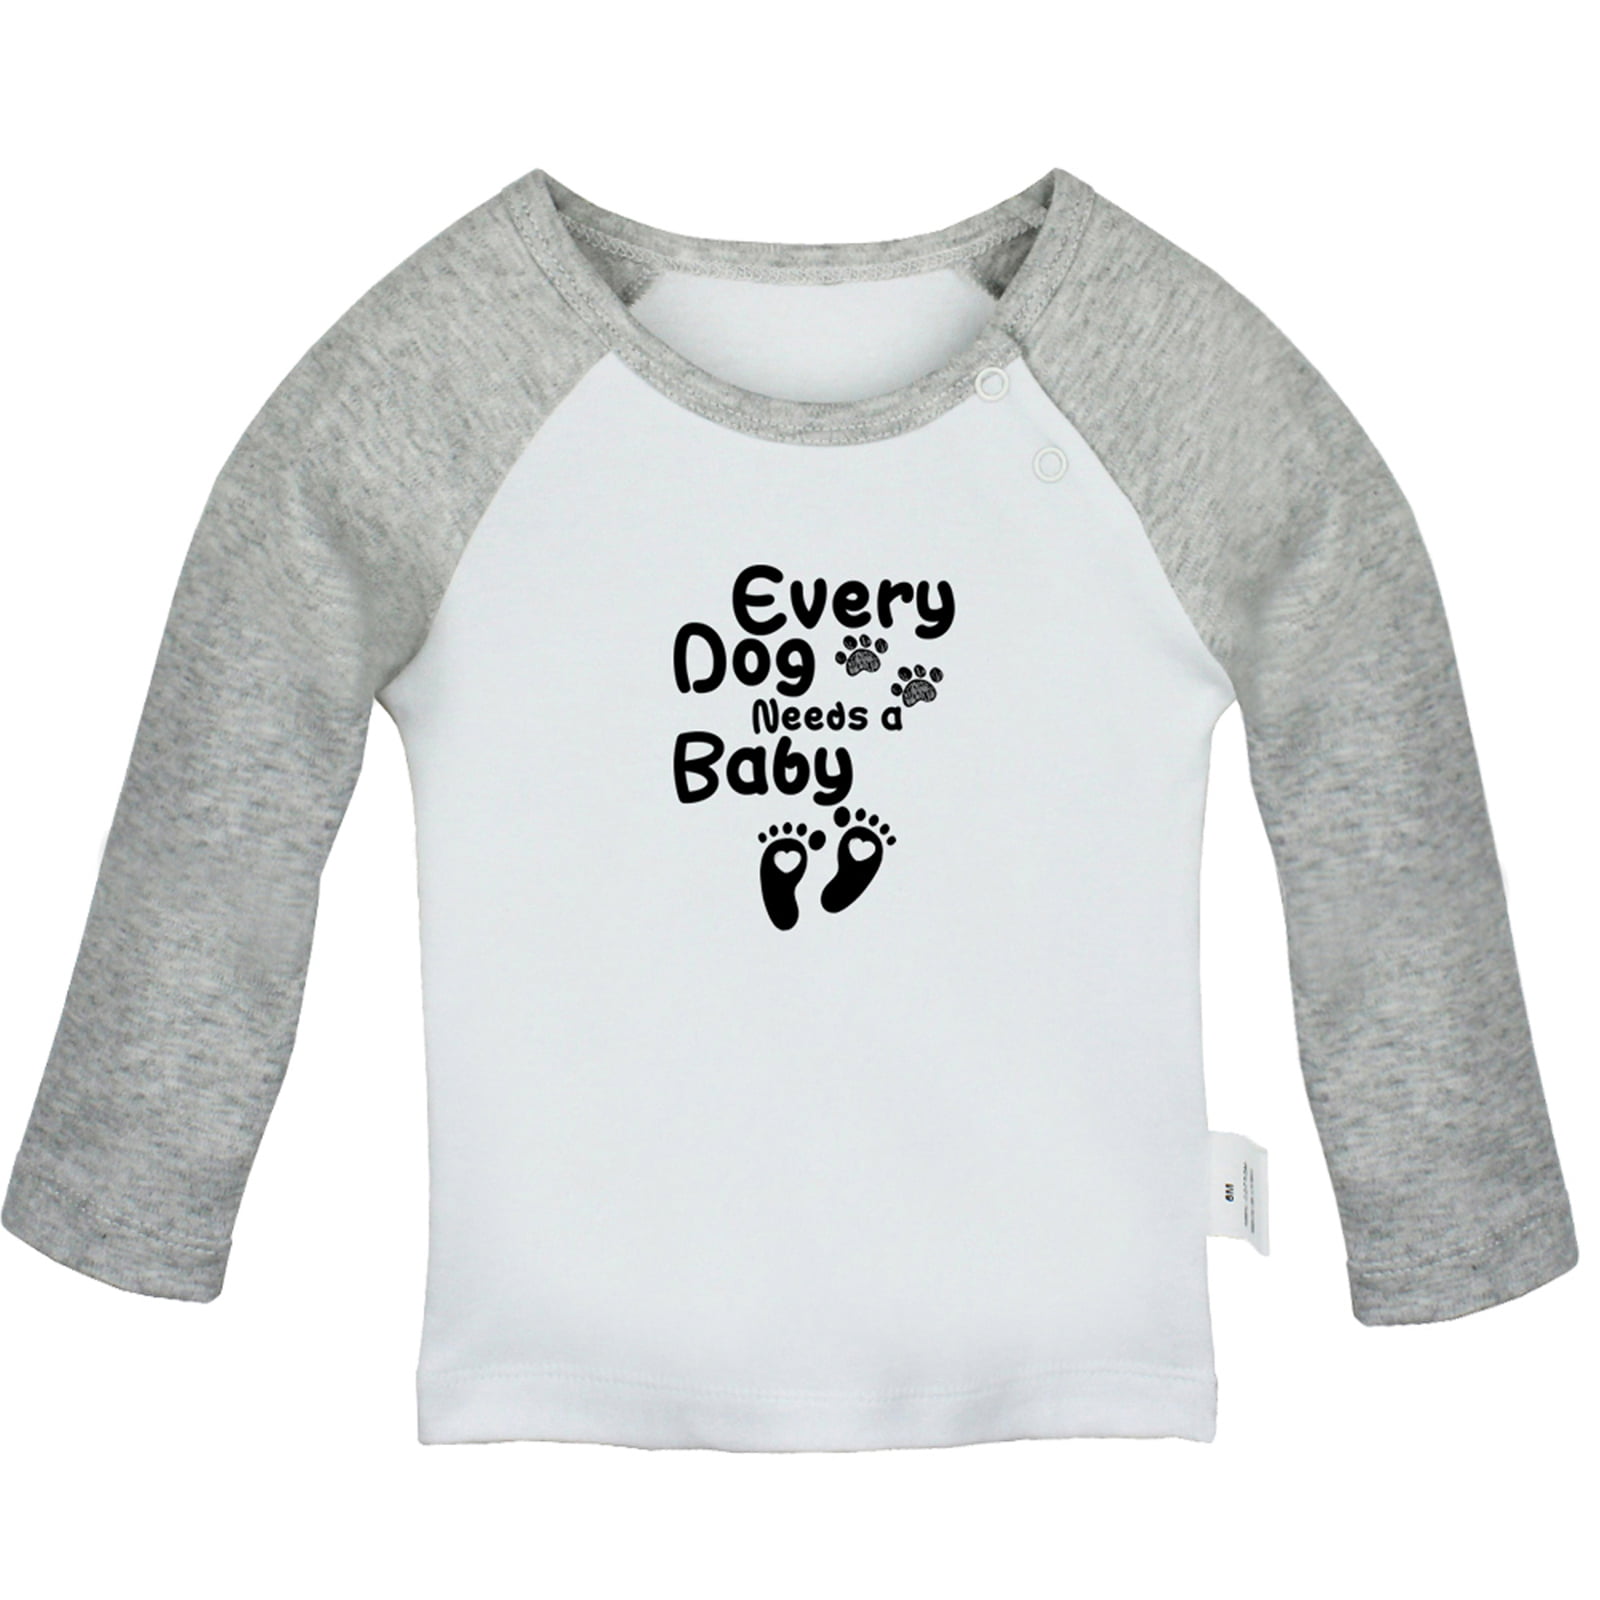 Every Dog Needs Baby Funny T For Baby, Newborn Babies T-shirts, Infant Tops, 0-24M Kids Graphic Tees Clothing (Long Gray Raglan T-shirt, 6-12 Months) - Walmart.com